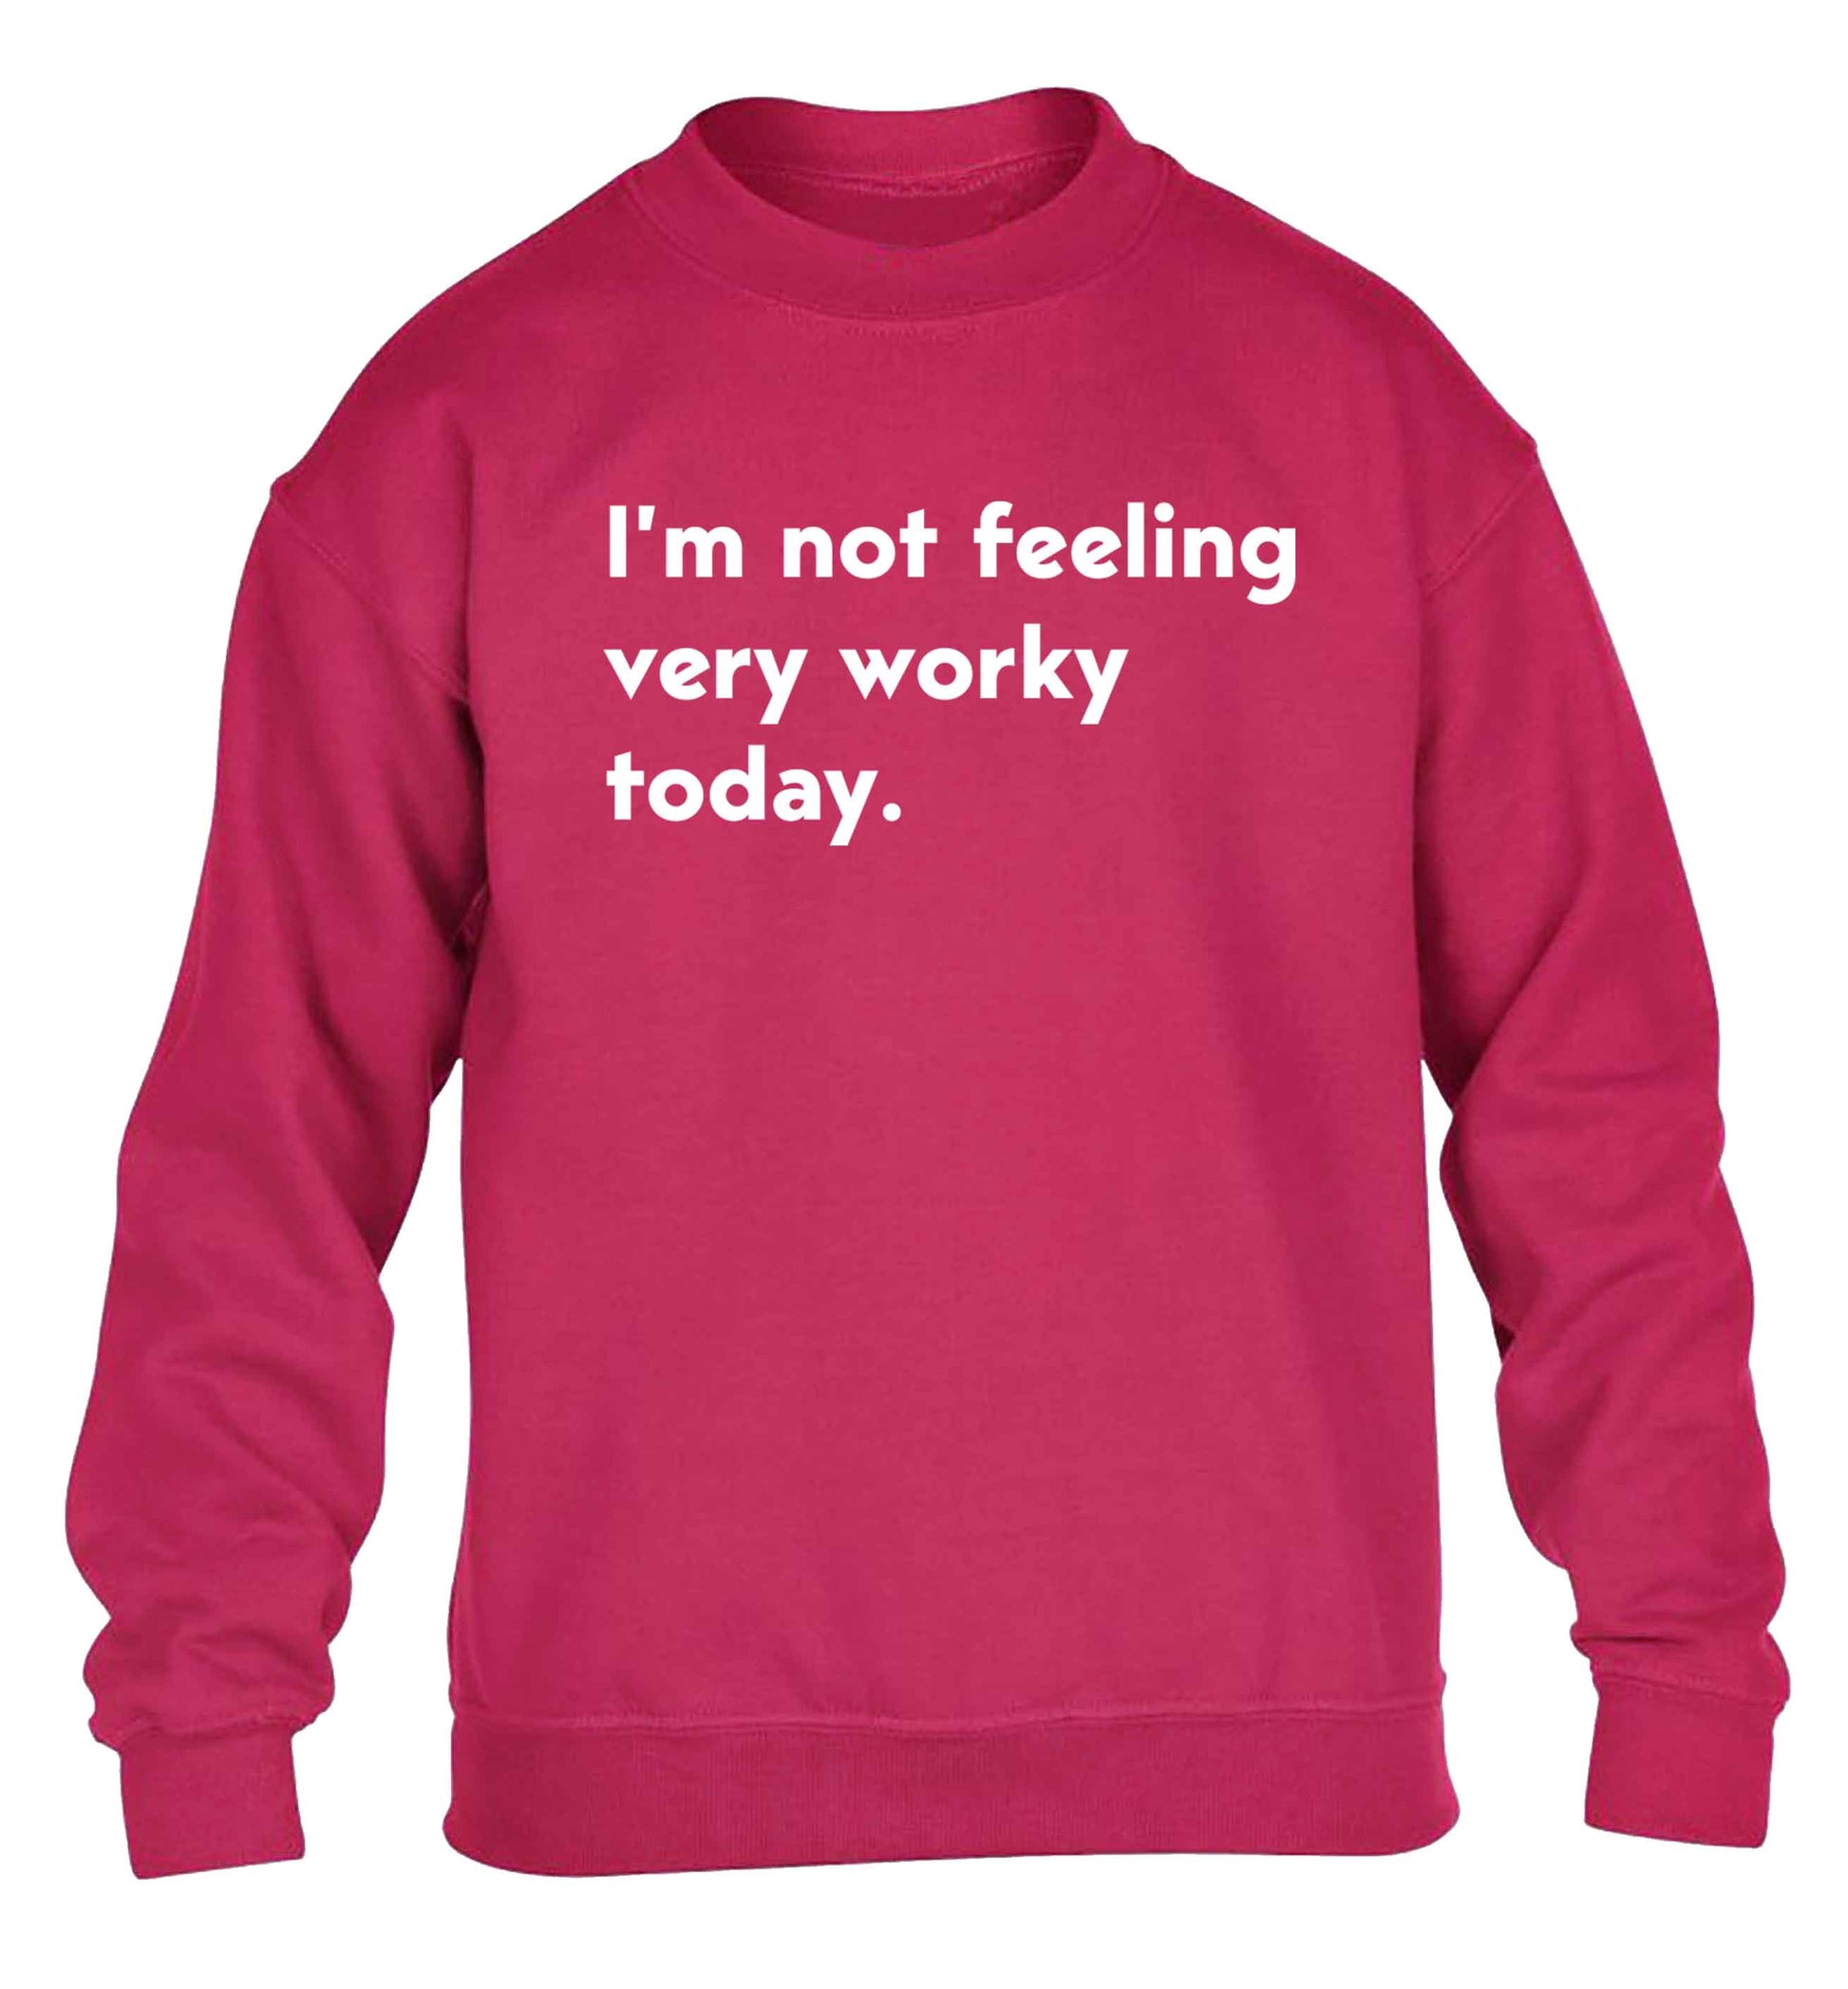 I'm not feeling very worky today children's pink sweater 12-13 Years